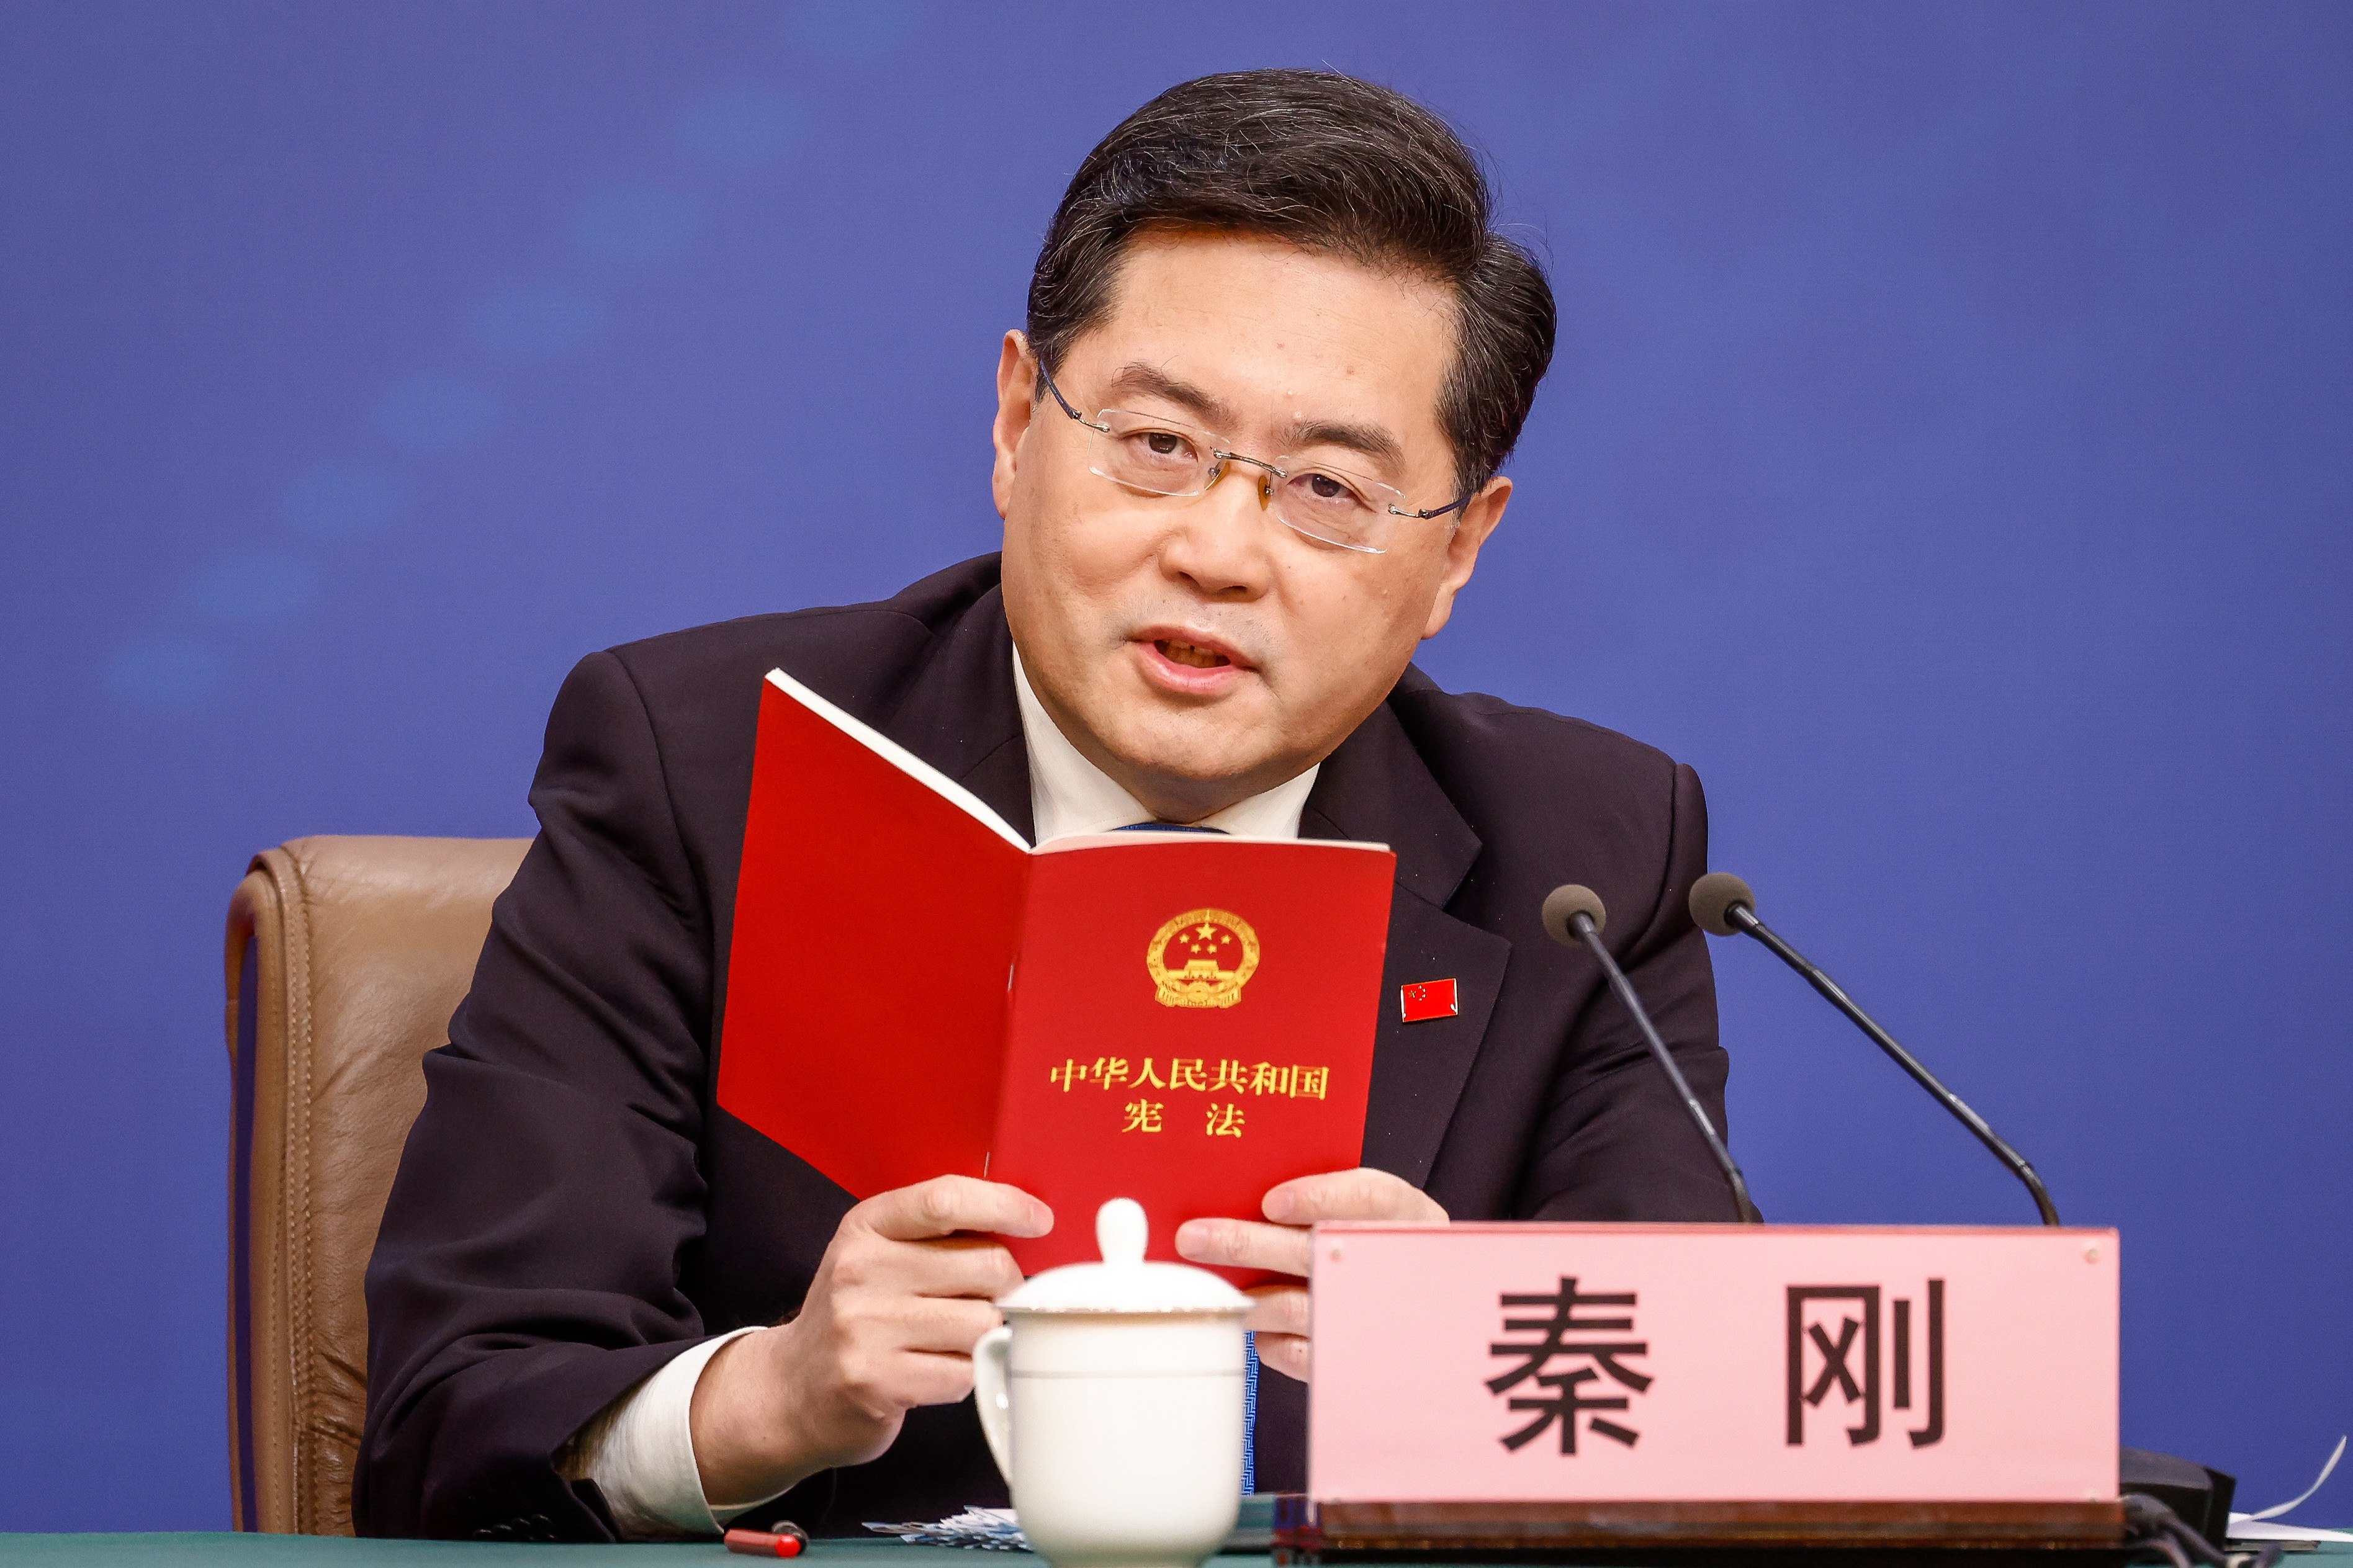 Chinese Foreign Minister Qin Gang reads from China’s constitution after a question about Taiwan during a press conference in Beijing on Tuesday. Photo: EPA-EFE